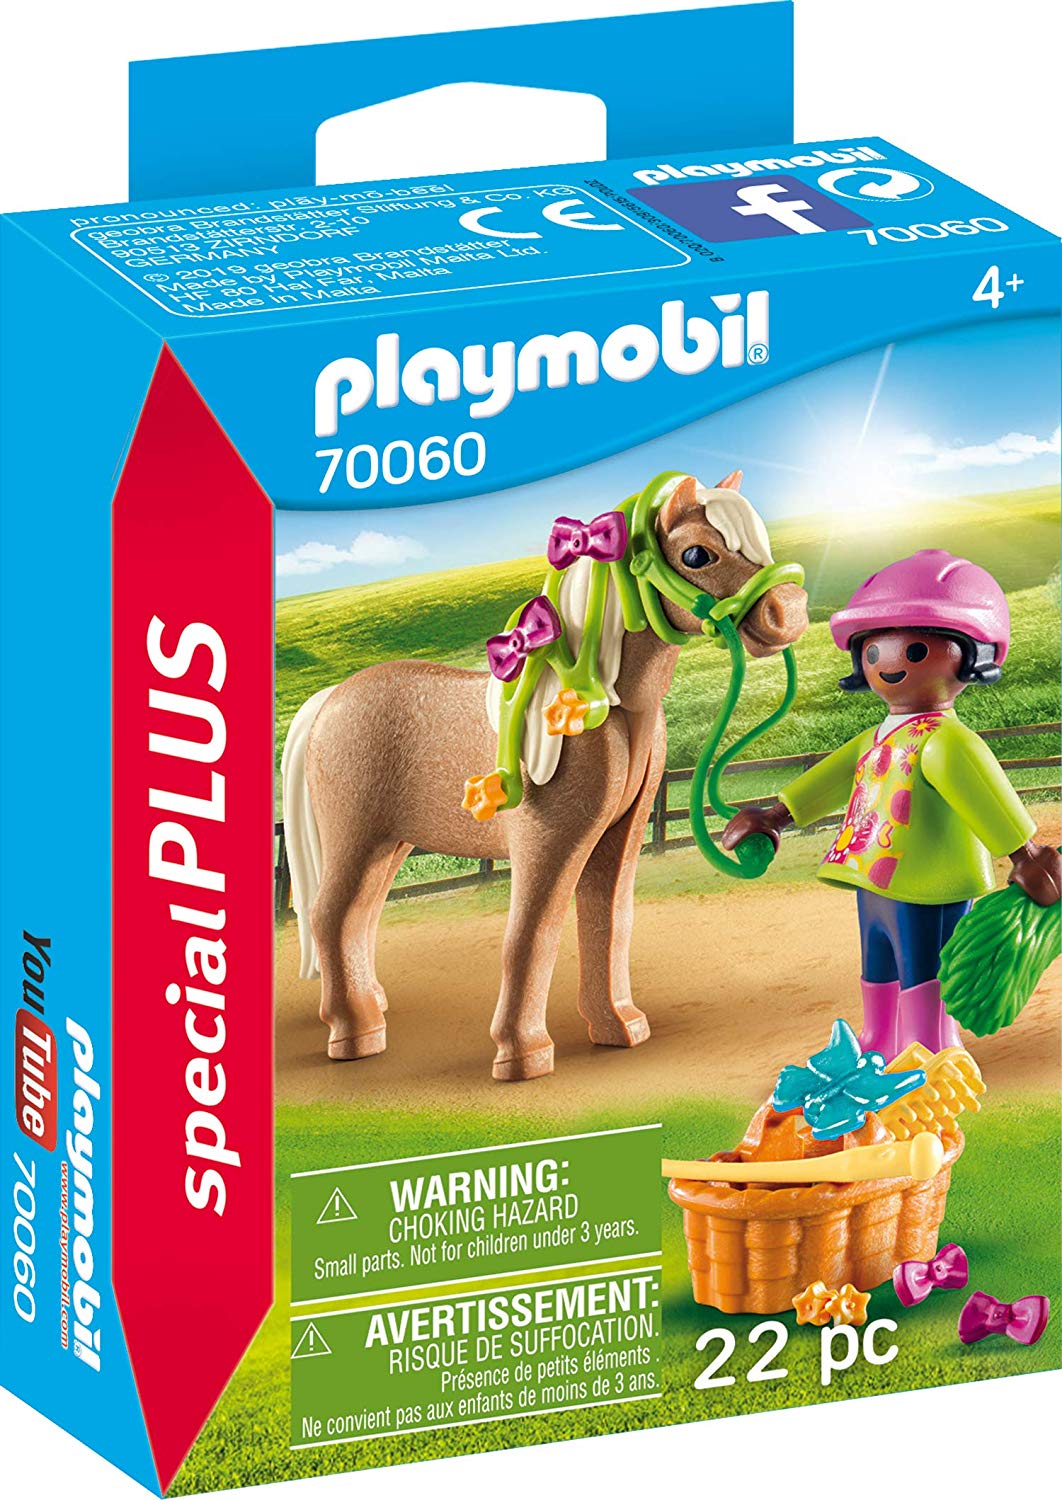 Playmobil 70060 Special Plus Girl With Pony, Multi-Coloured